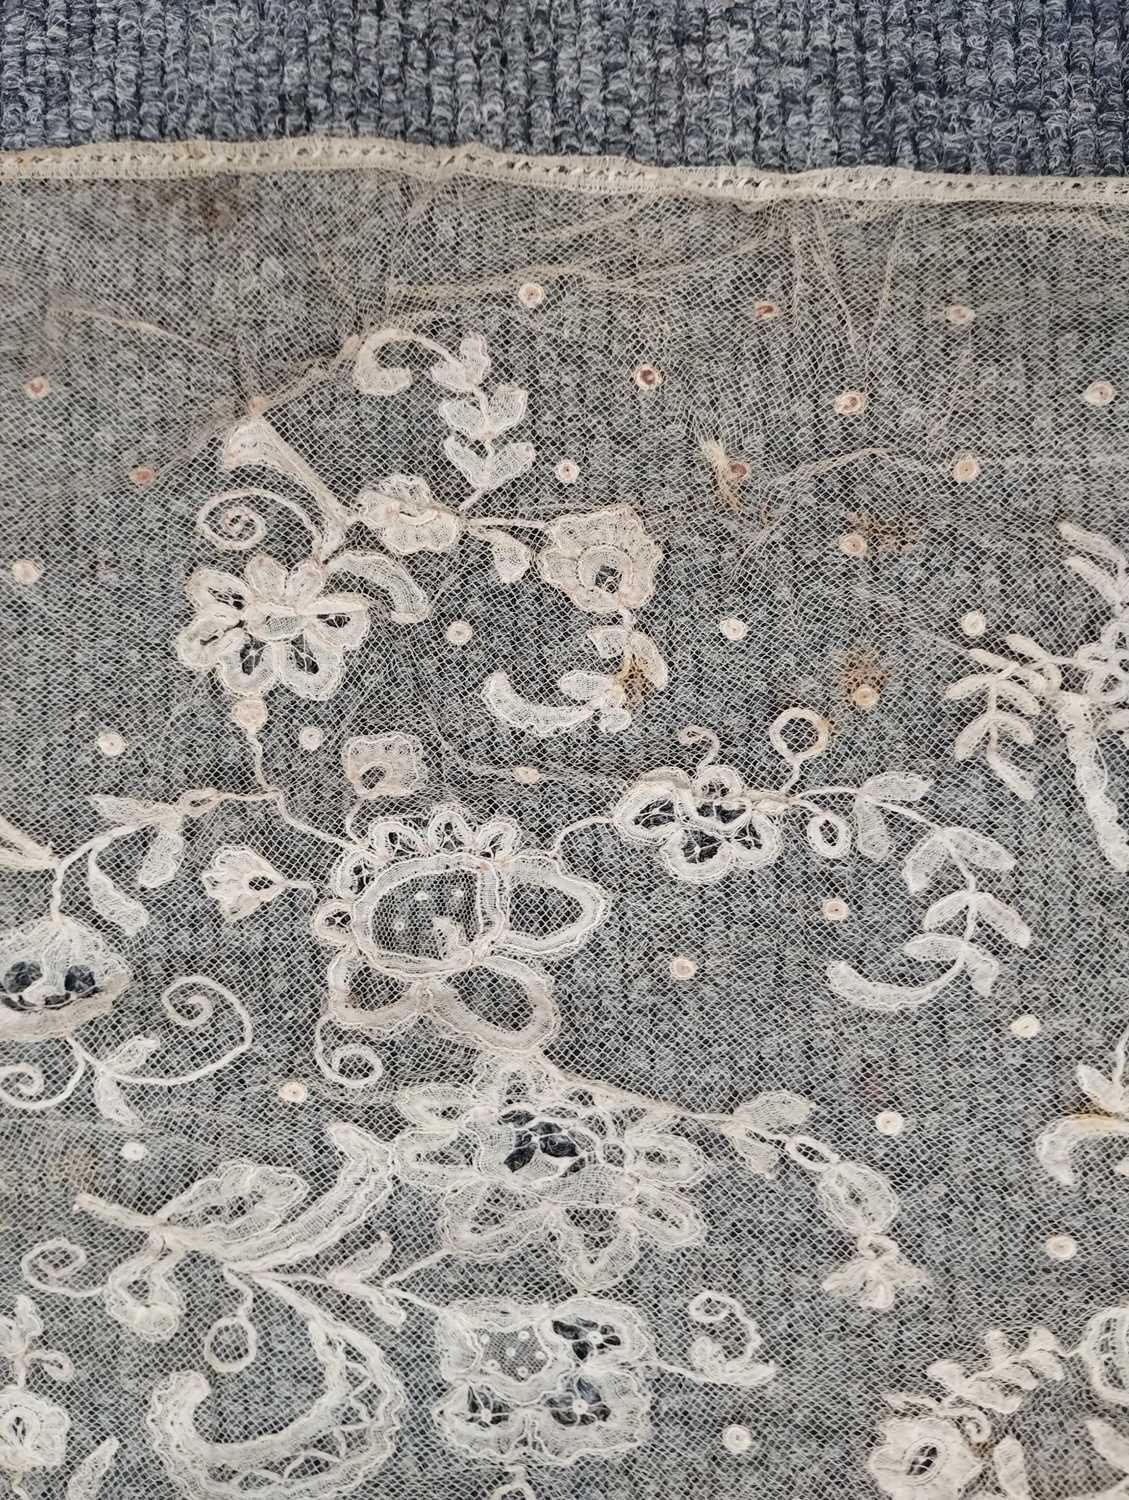 Early 20th Century Lace comprising a flounce with appliquéd flower heads and motifs within a - Image 29 of 32